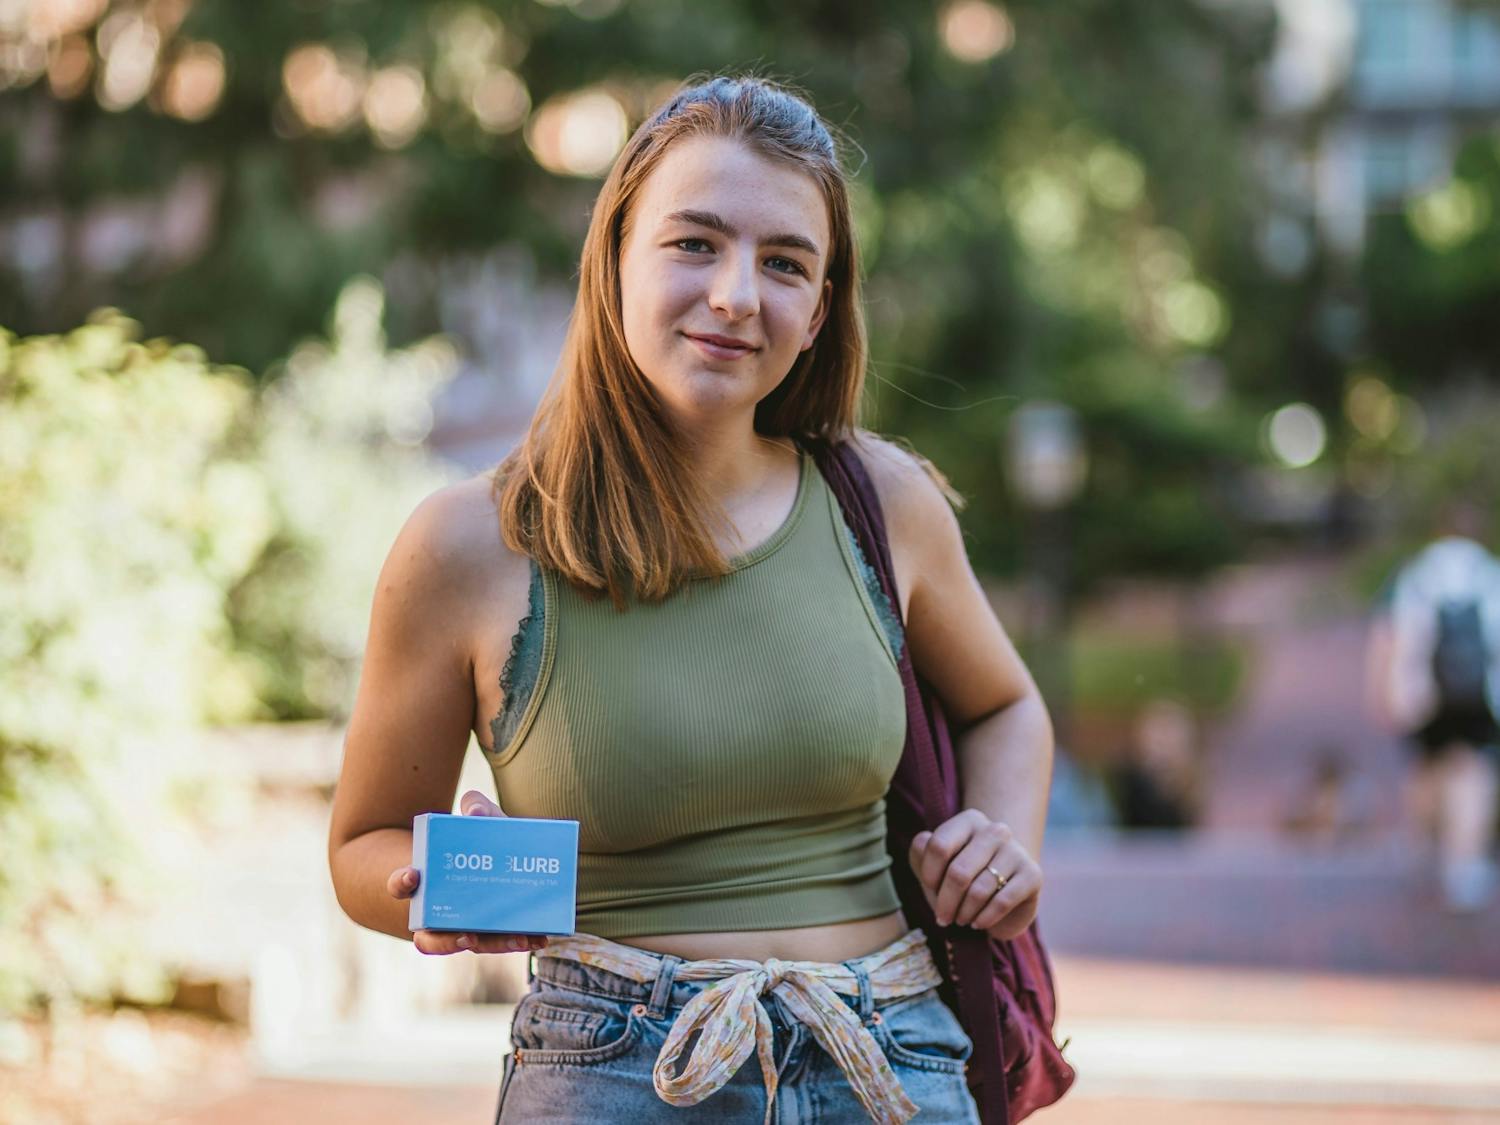 With a backpack and a water bottle, sophomore Izzy Grandic walked around campus for over thirteen straight hours  to raise awareness about inaccessible healthcare. She poses with her card game, Boob Blurb, on Wednesday, Sept. 21, 2022.